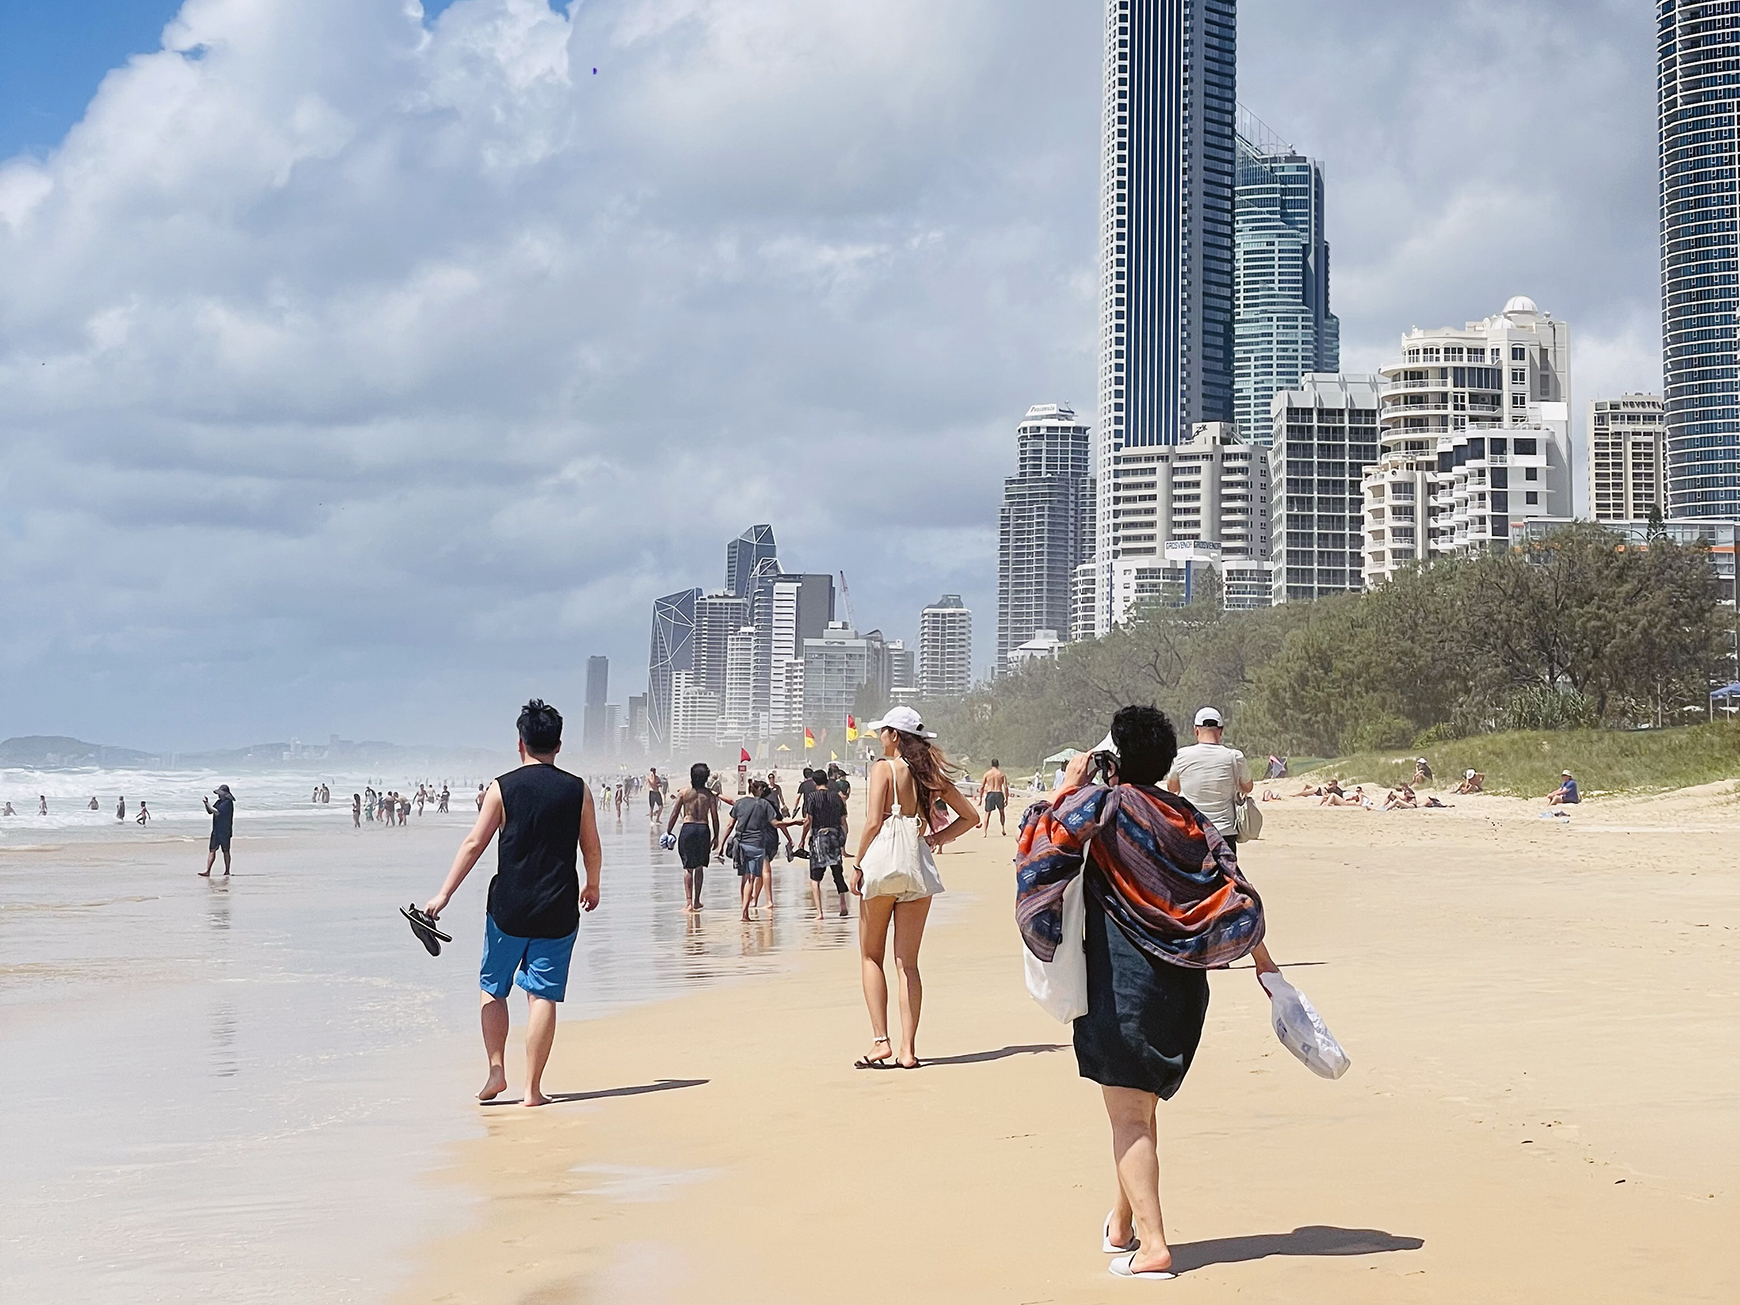 Study abroad in Australia with IFSA